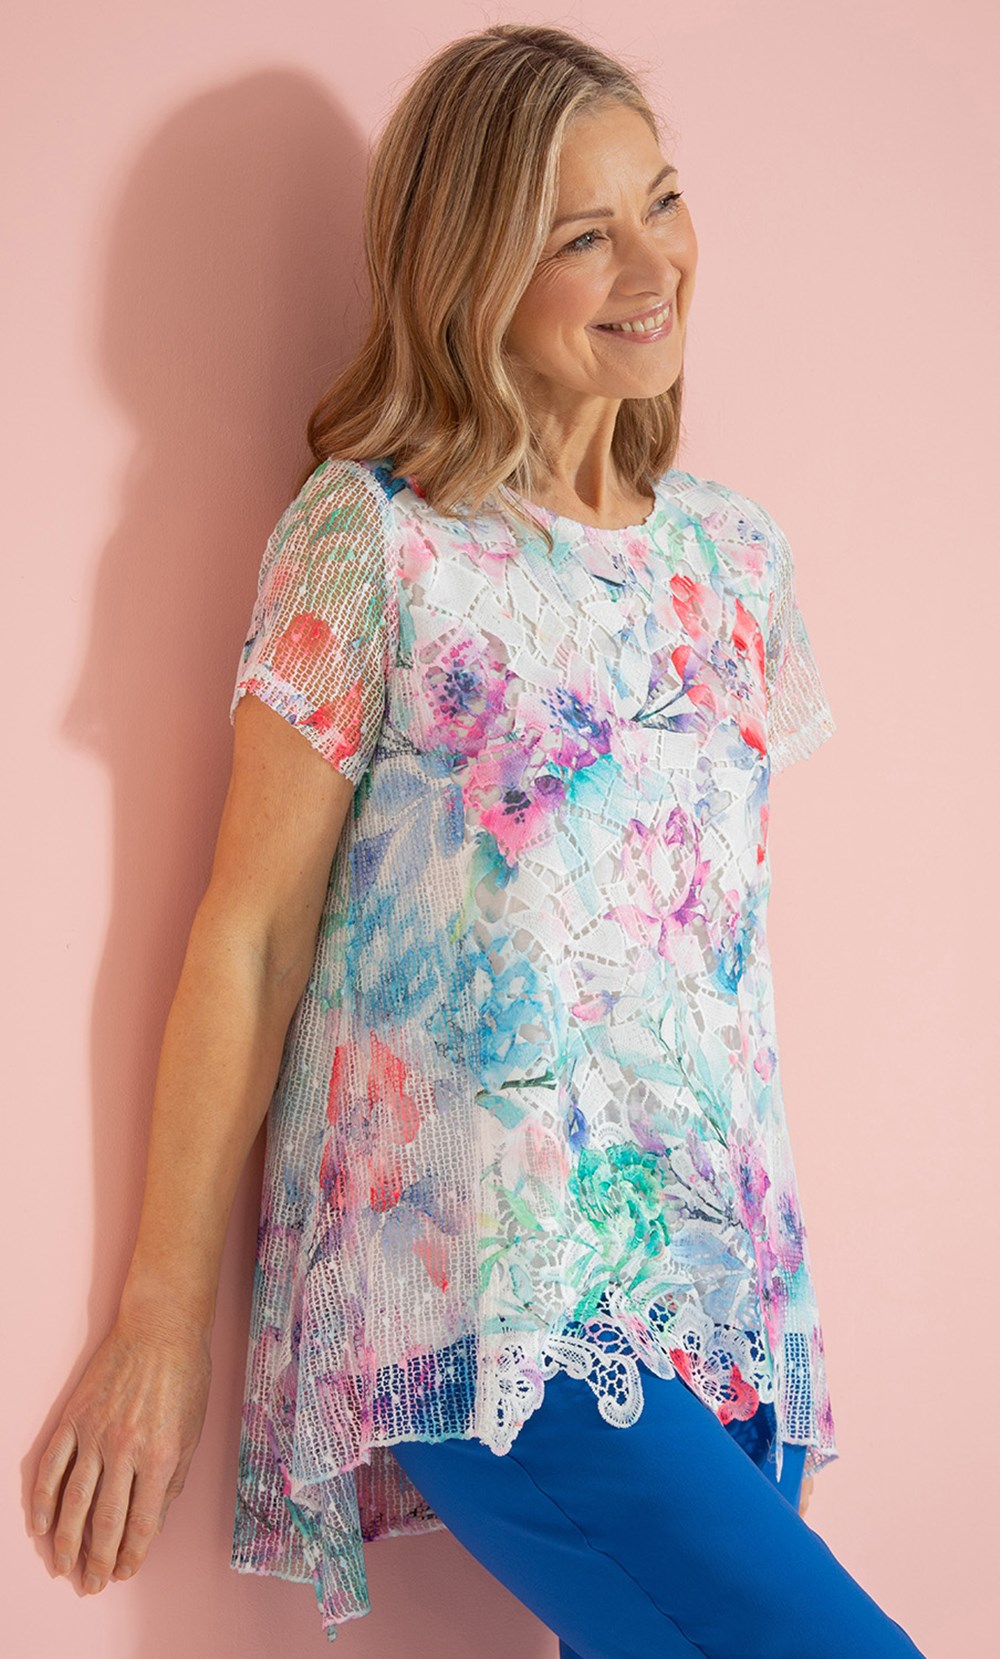 Anna Rose Printed Lace Layered Top